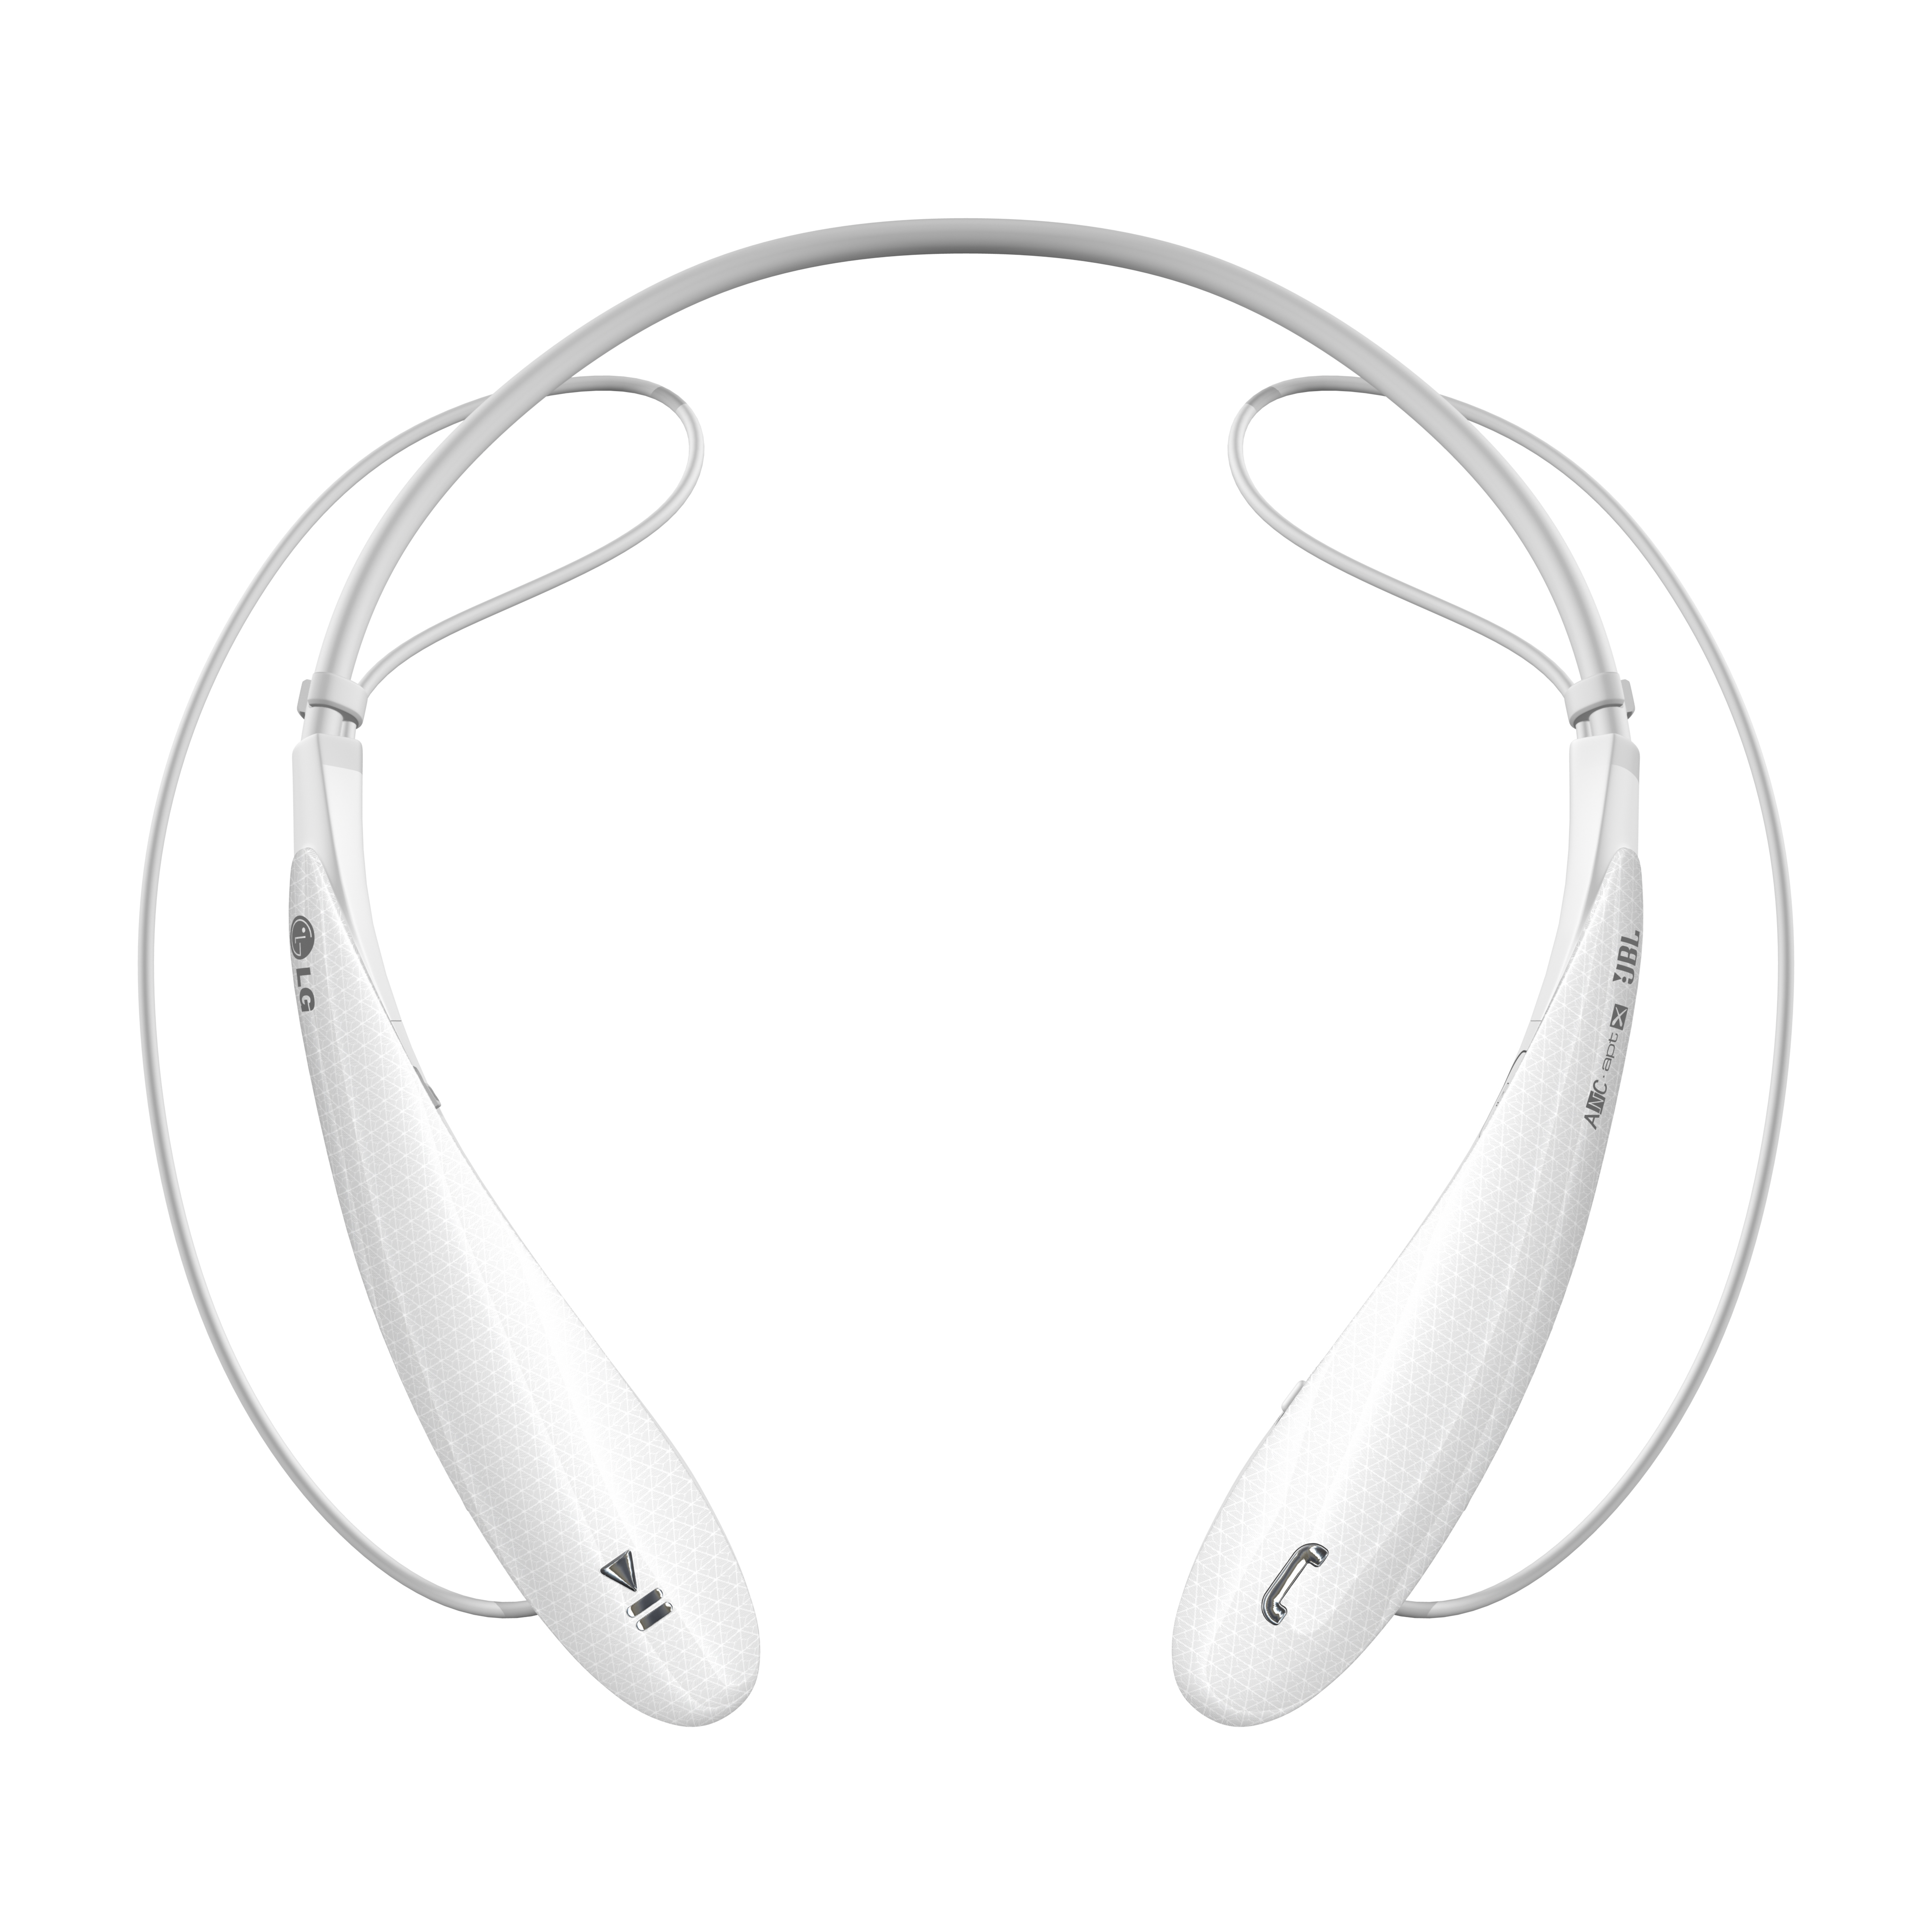 A front view of LG TONE ULTRA (HBS-800) in white color with its earphones pulled in.